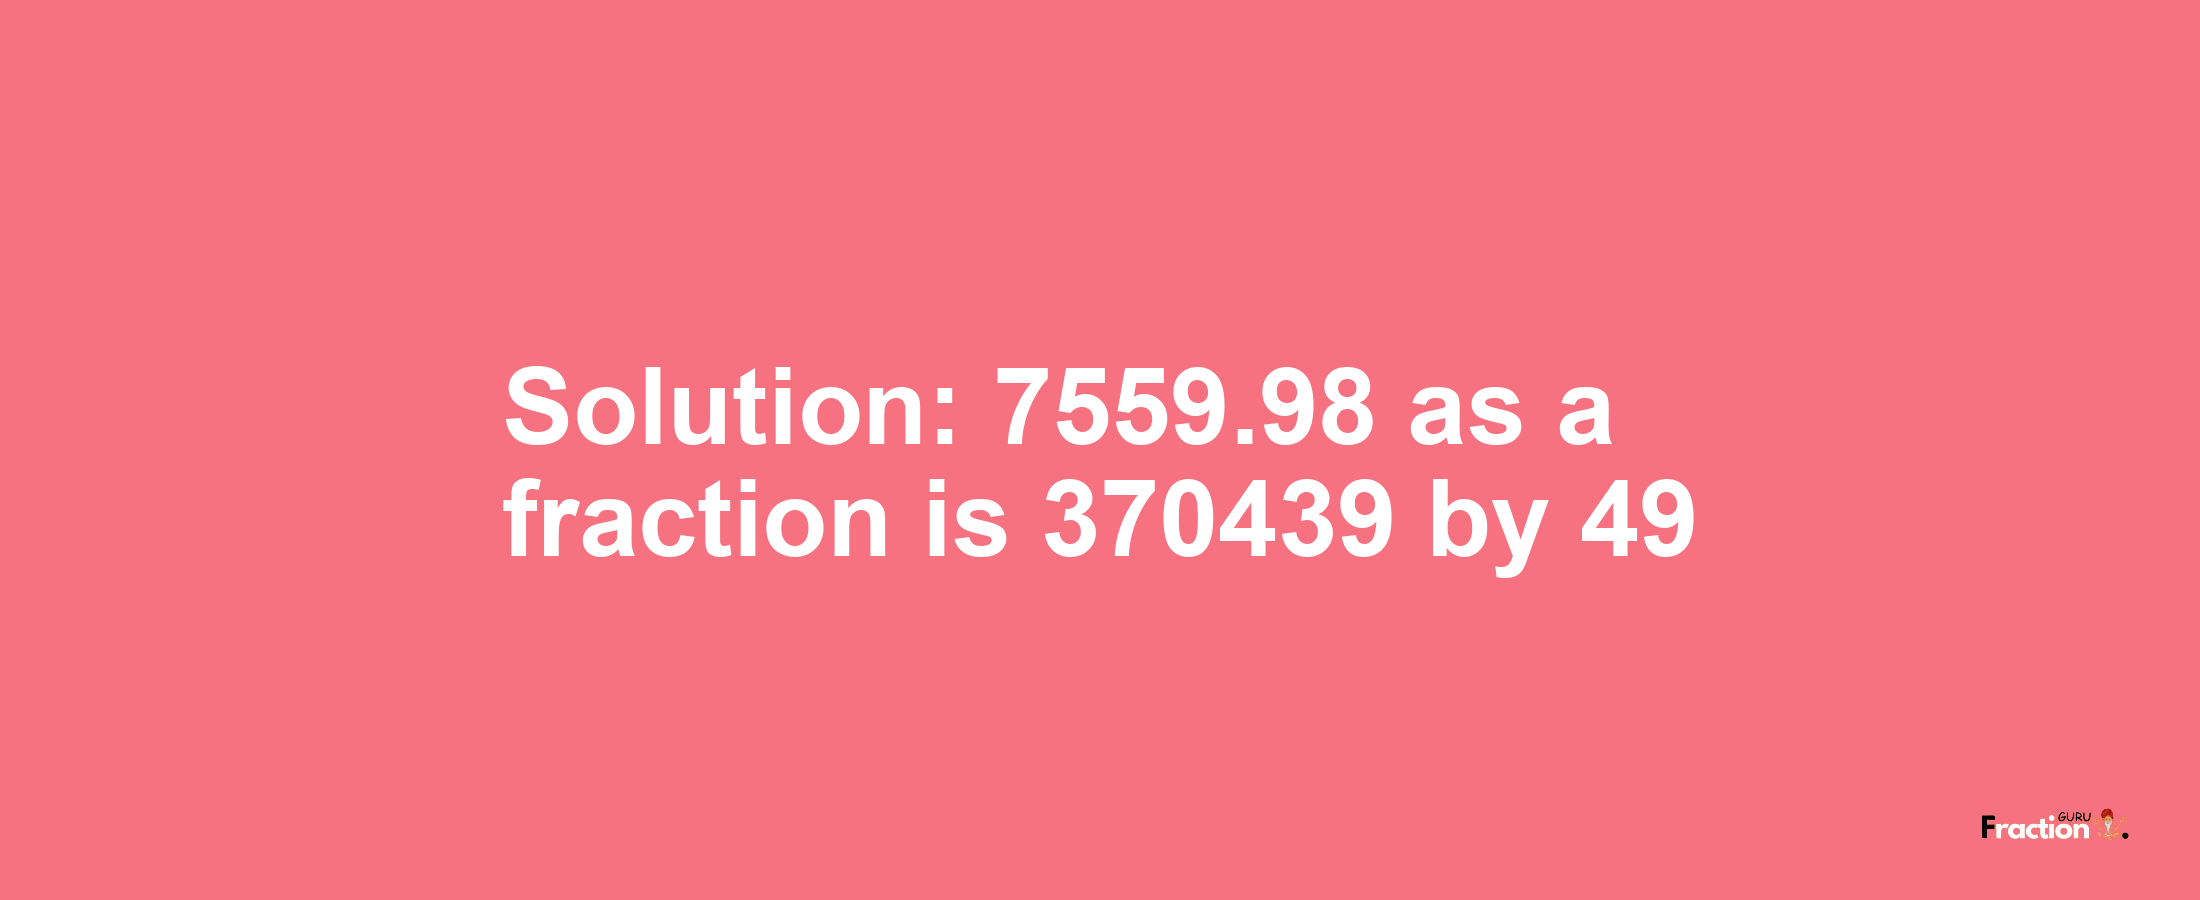 Solution:7559.98 as a fraction is 370439/49